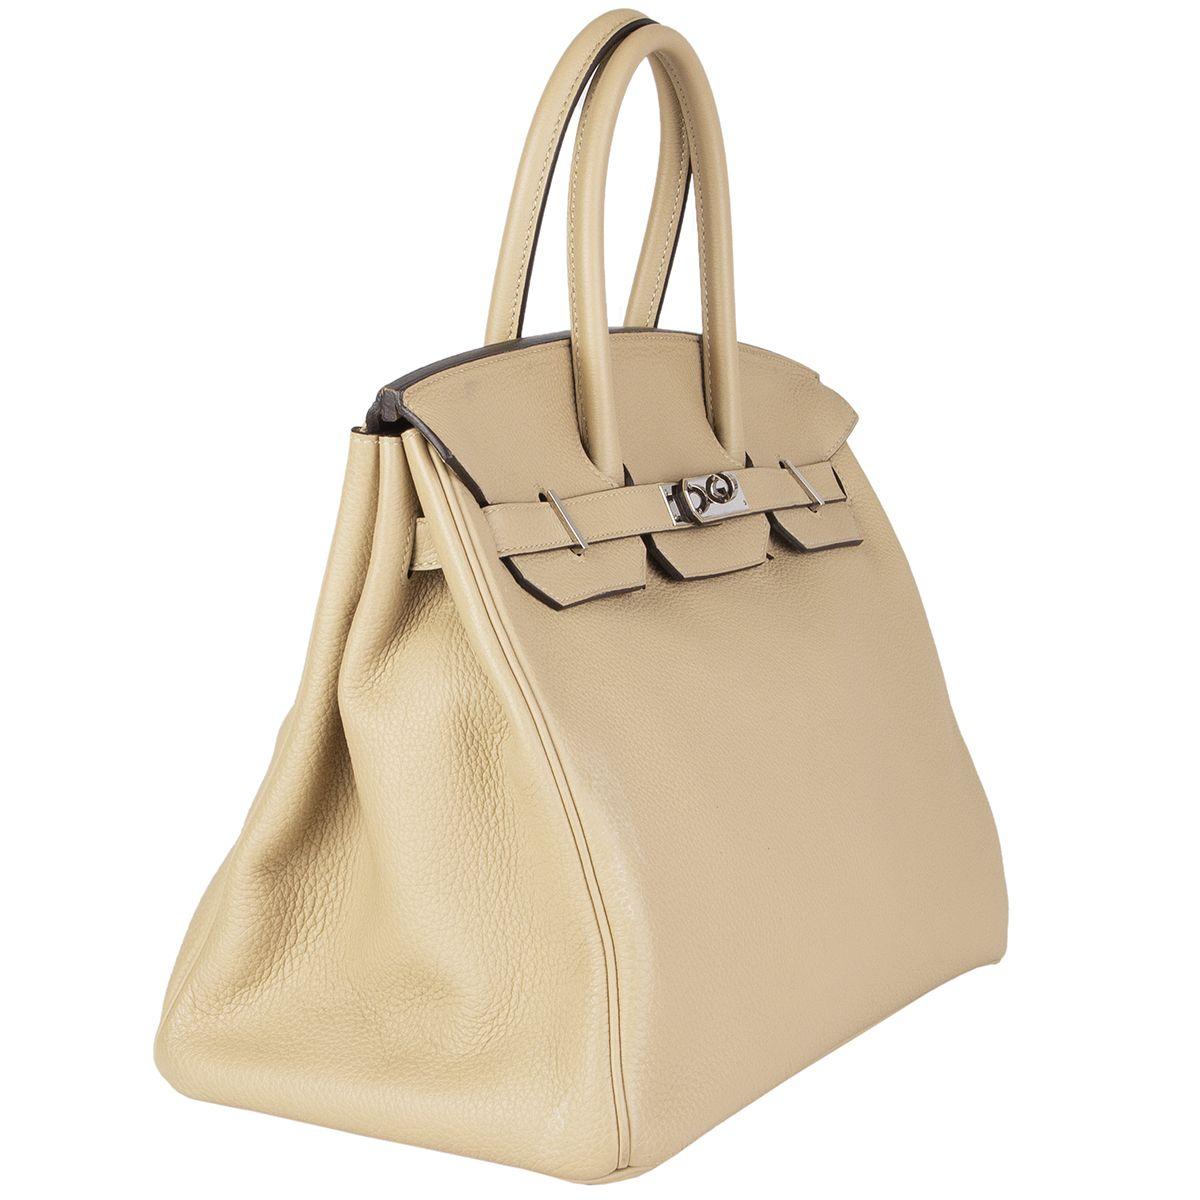 Hermès 'Birkin 35' in Trench (beige) Veau Togo leather with palladium hardware. Lined in Chevre (goat skin) with an open pocket against the front and zipper pocket against the back. Has been carried and is in excellent condition. Comes with keys,